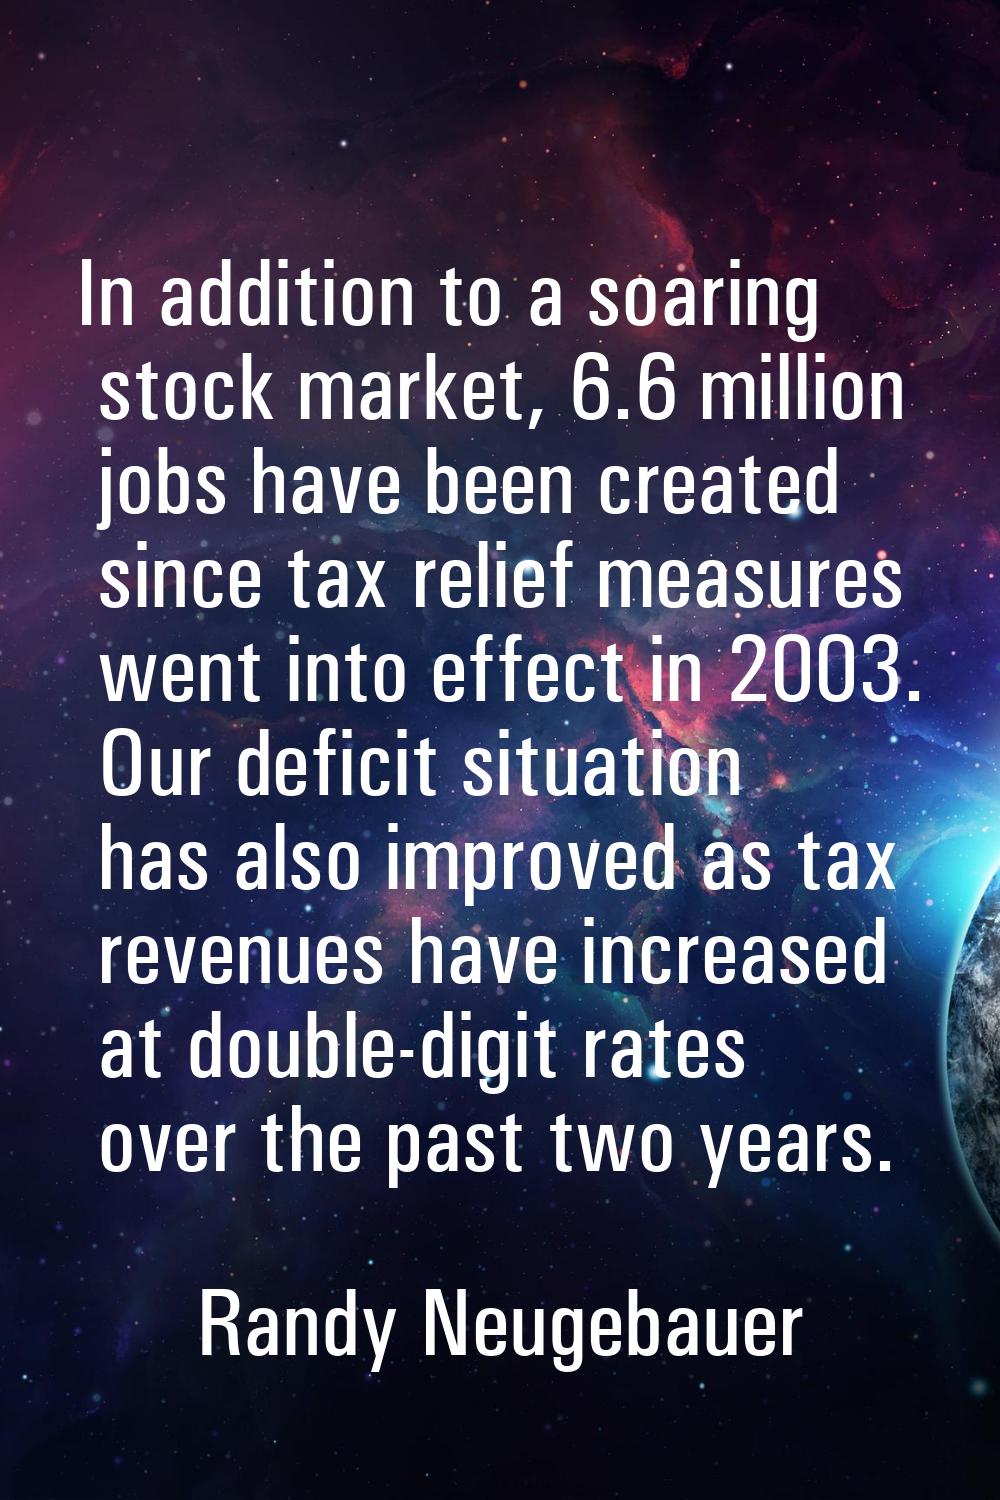 In addition to a soaring stock market, 6.6 million jobs have been created since tax relief measures